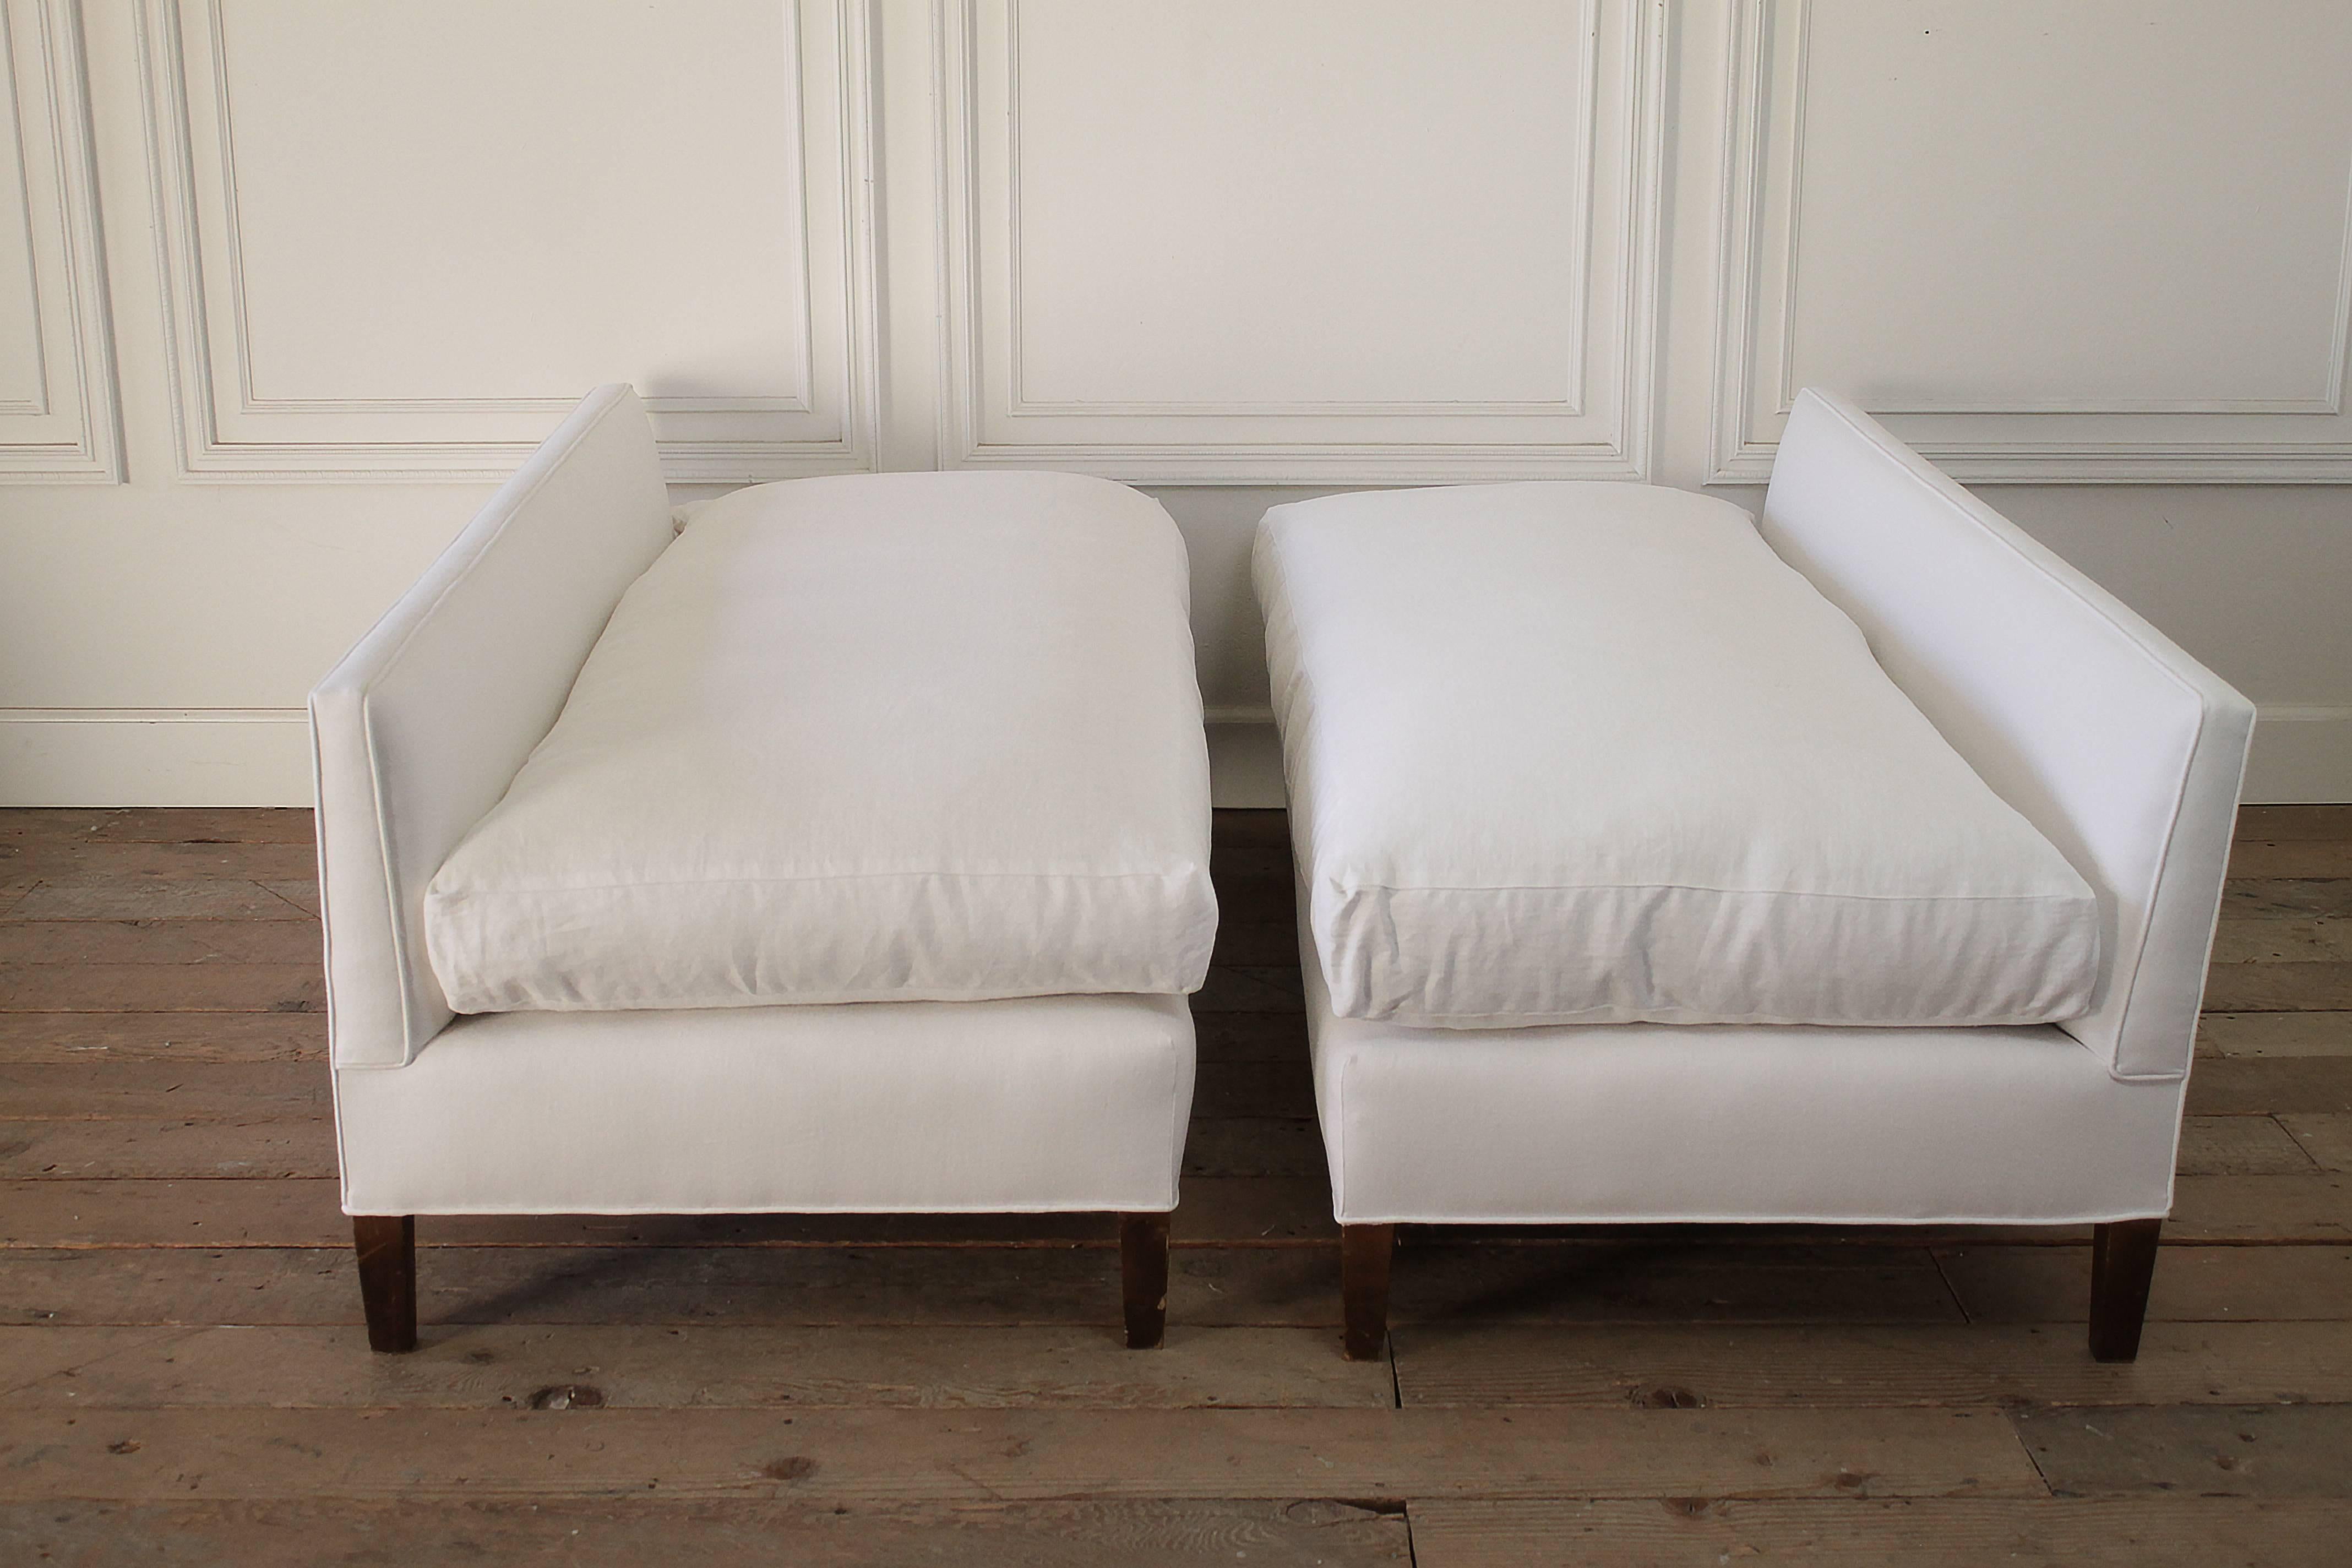 American Mid-Century Modern White Linen Upholstered Bench with Down Cushion